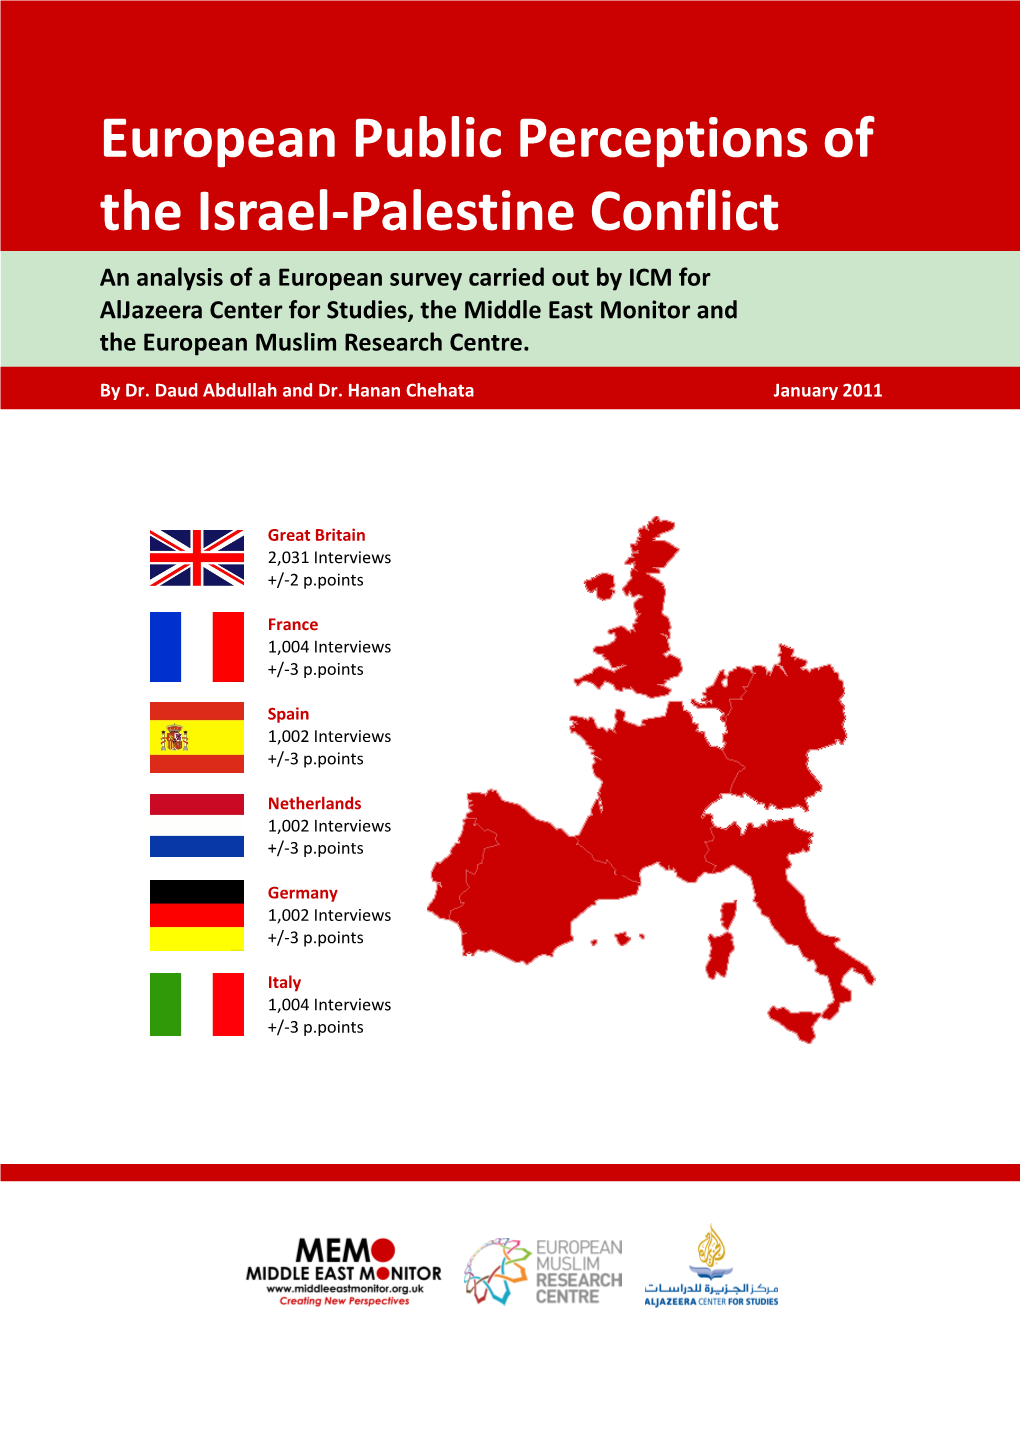 European Public Perceptions of the Israel-Palestine Conflict